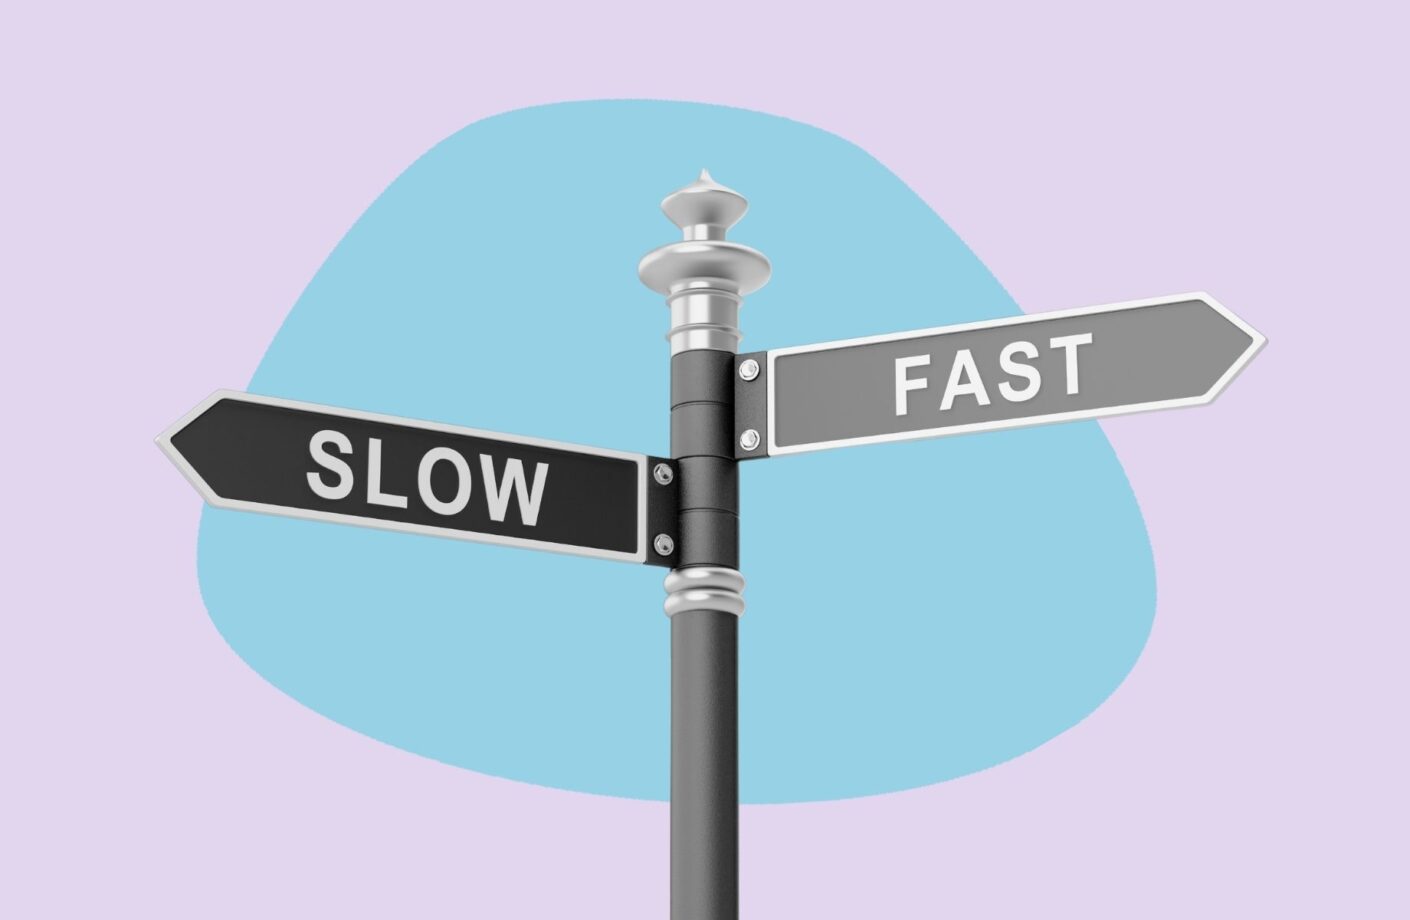 signpost pointing to 'fast' and 'slow'